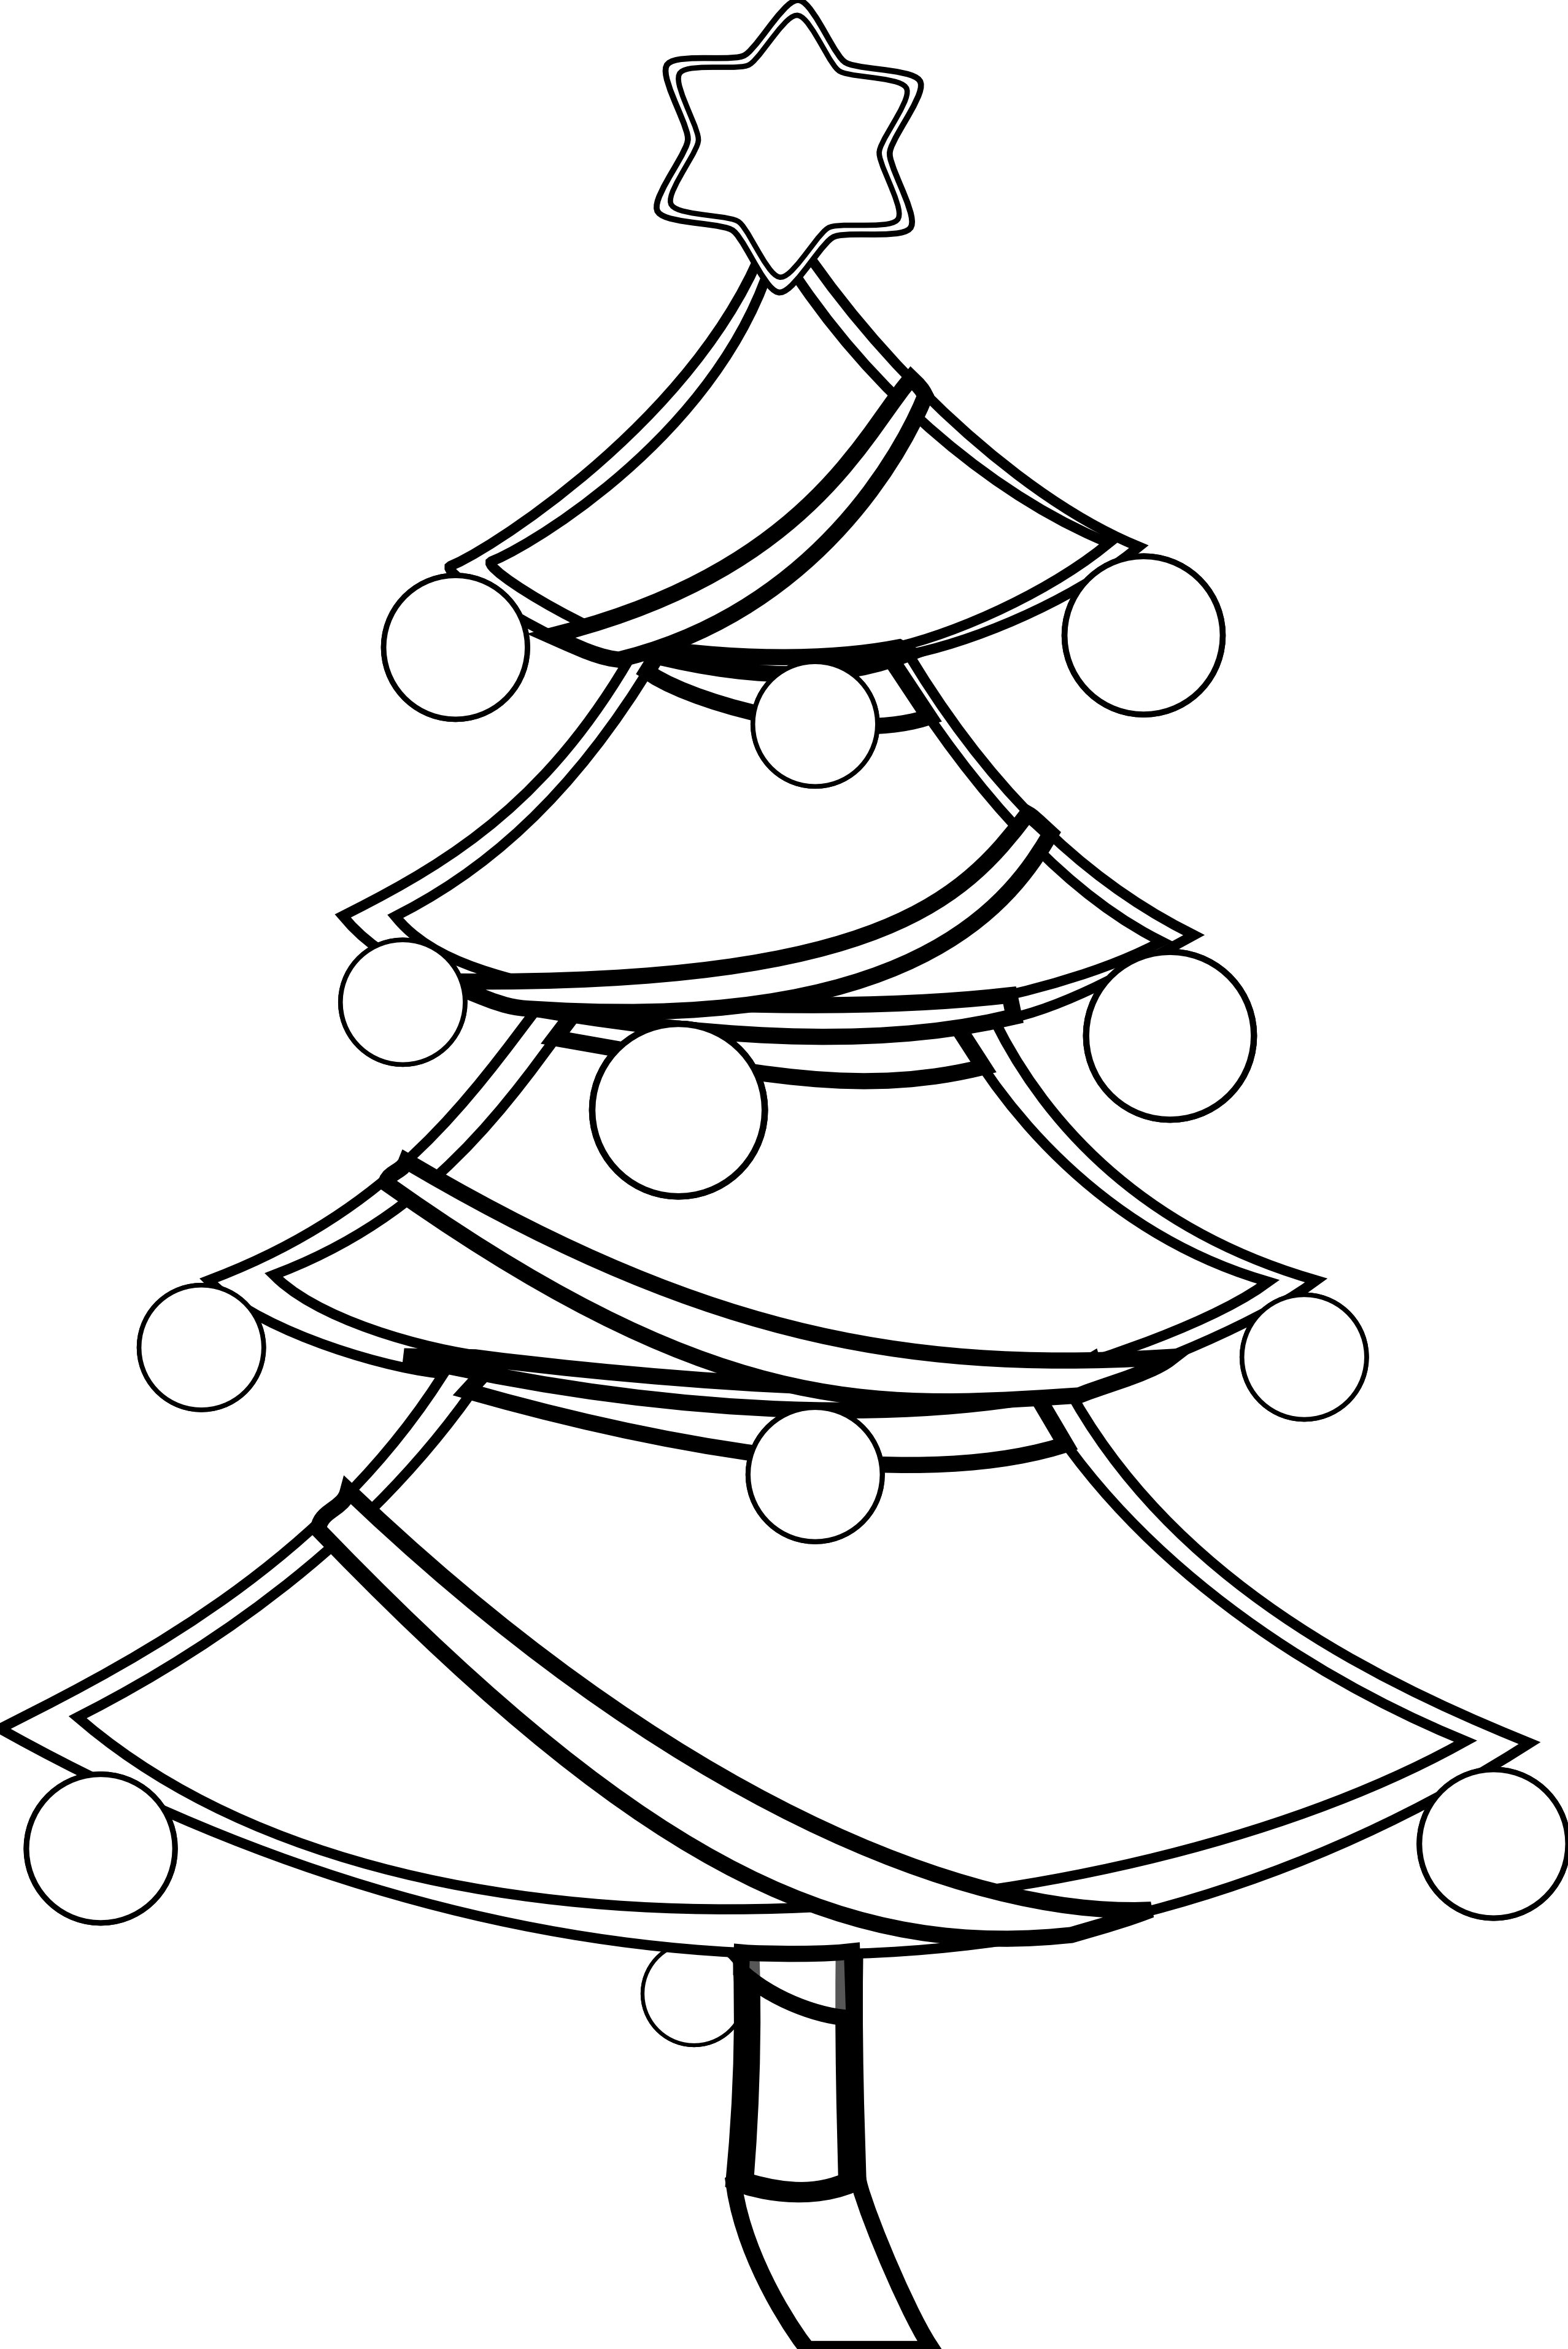 Free Christmas Black And White Images, Download Free Clip.